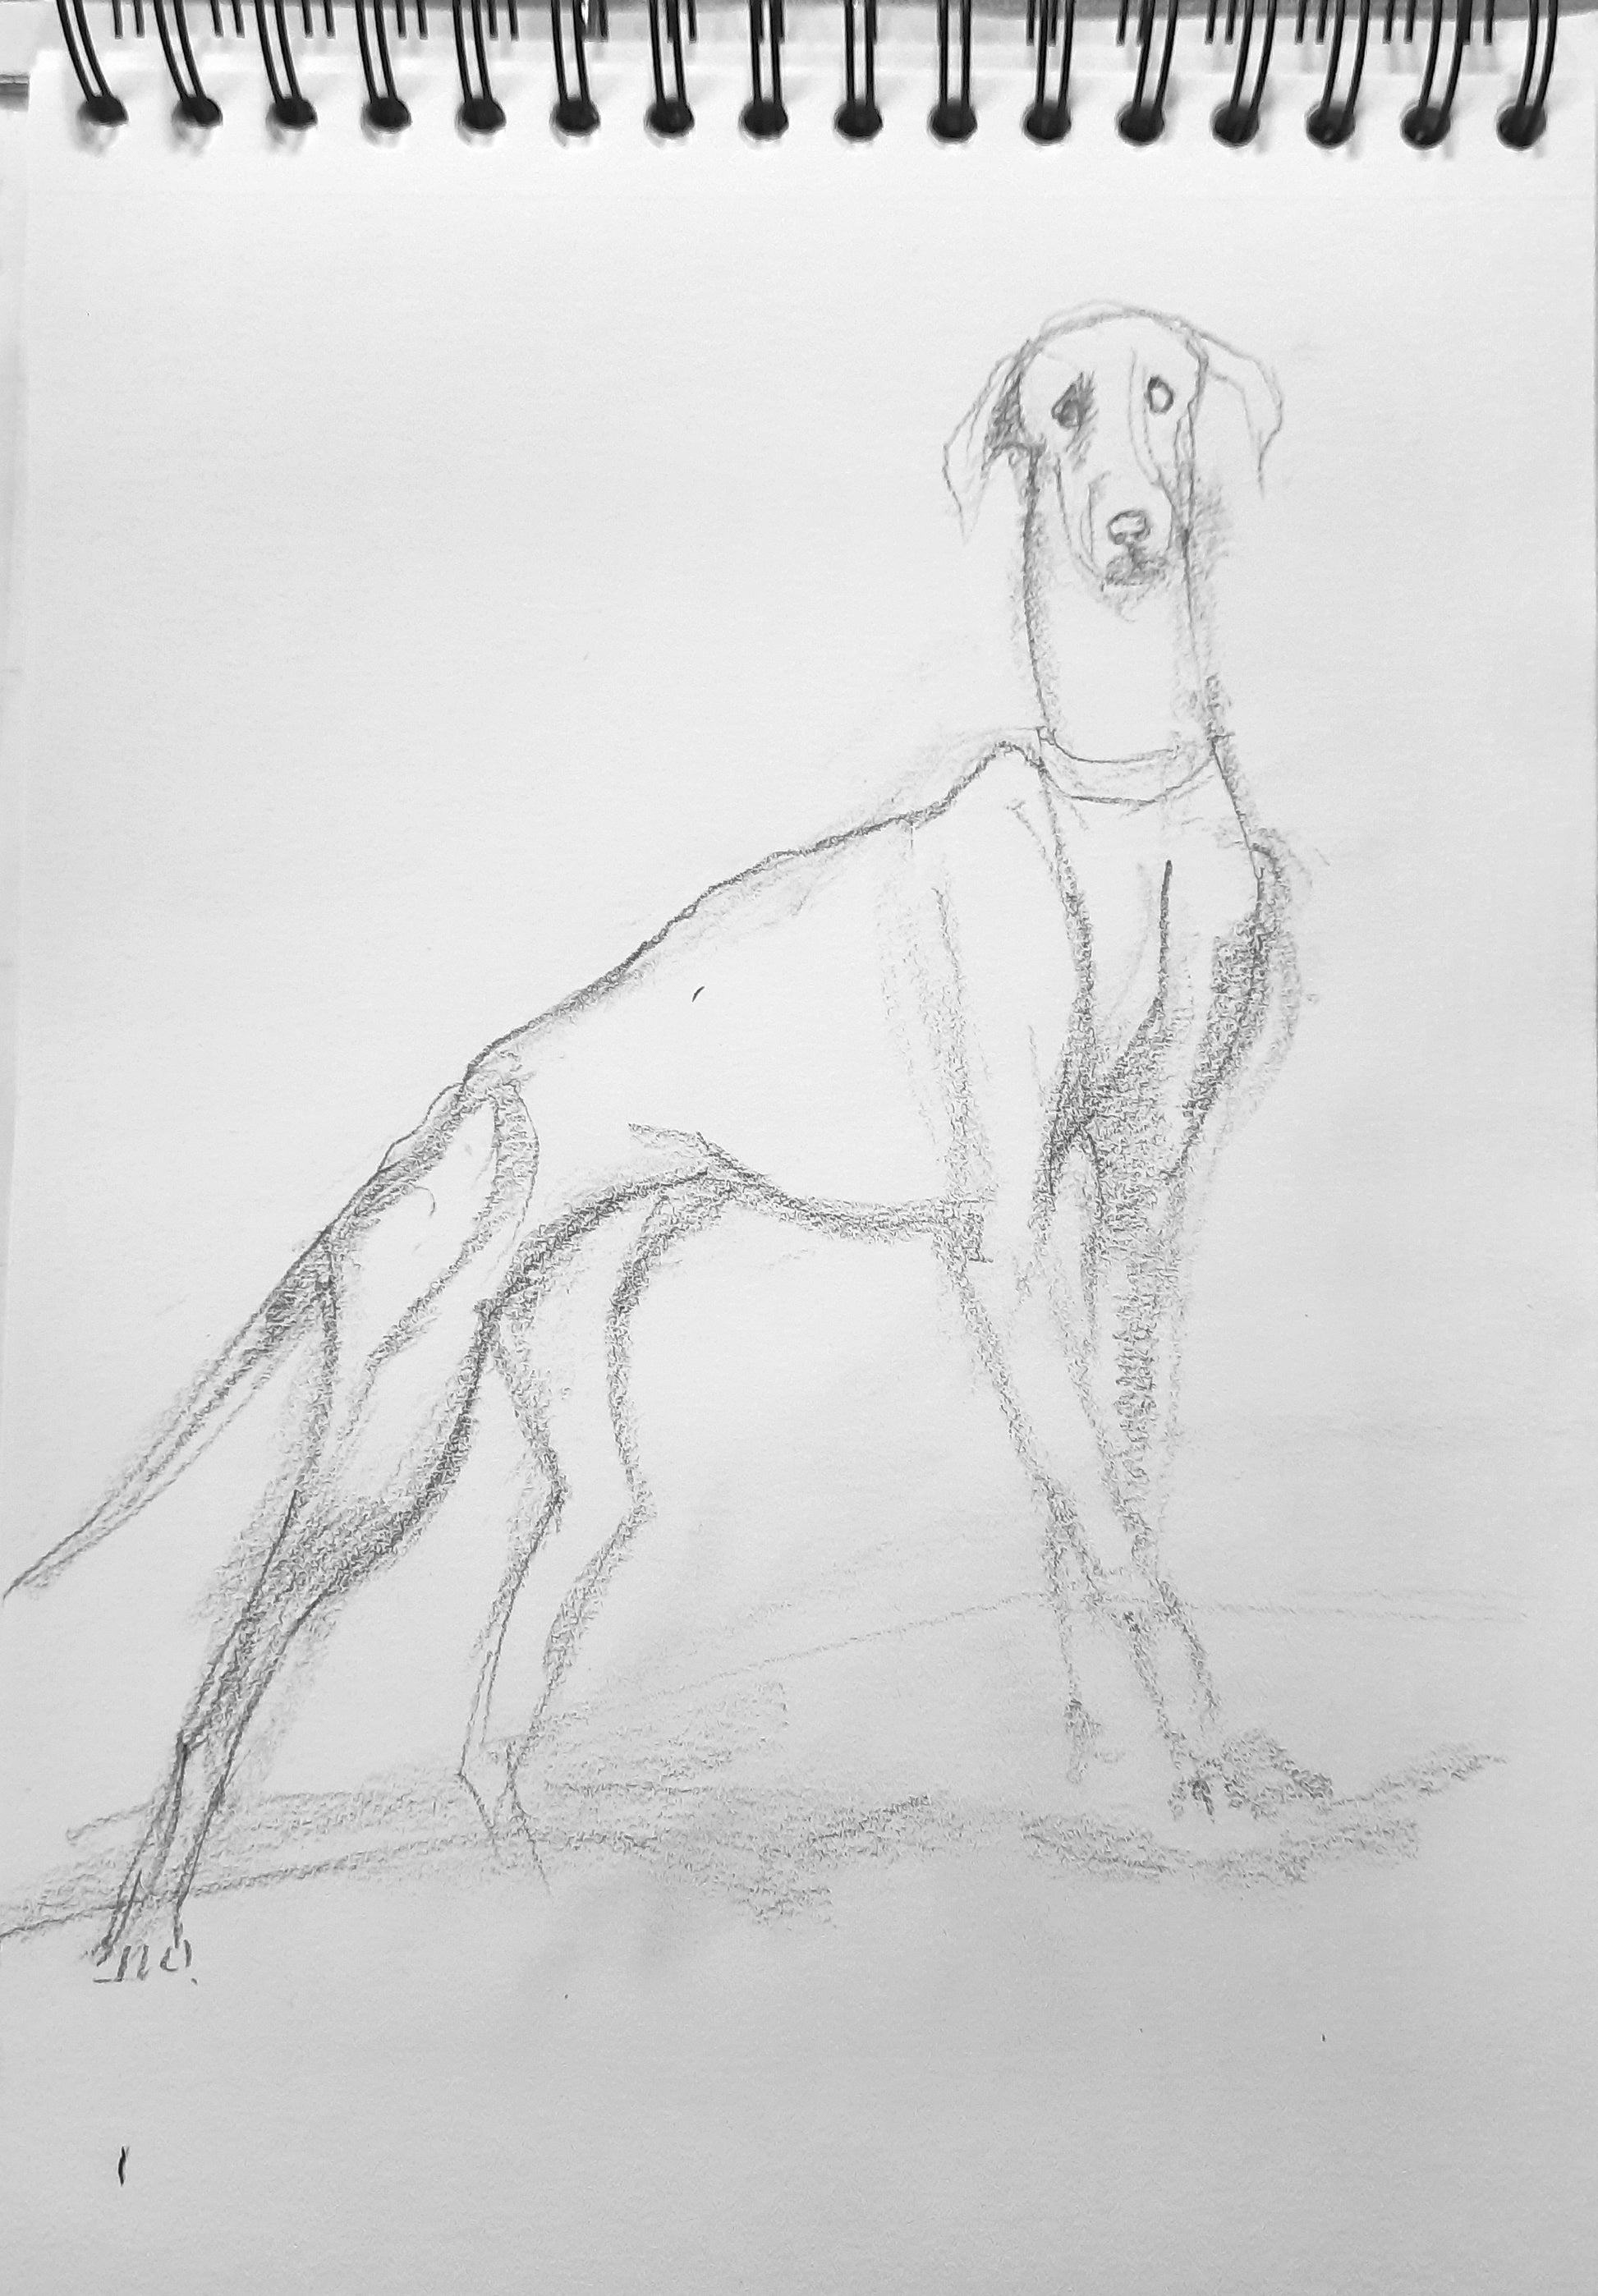 Work in progress, The Famous Indian Mudhol breed dog, pencil sketch on paper